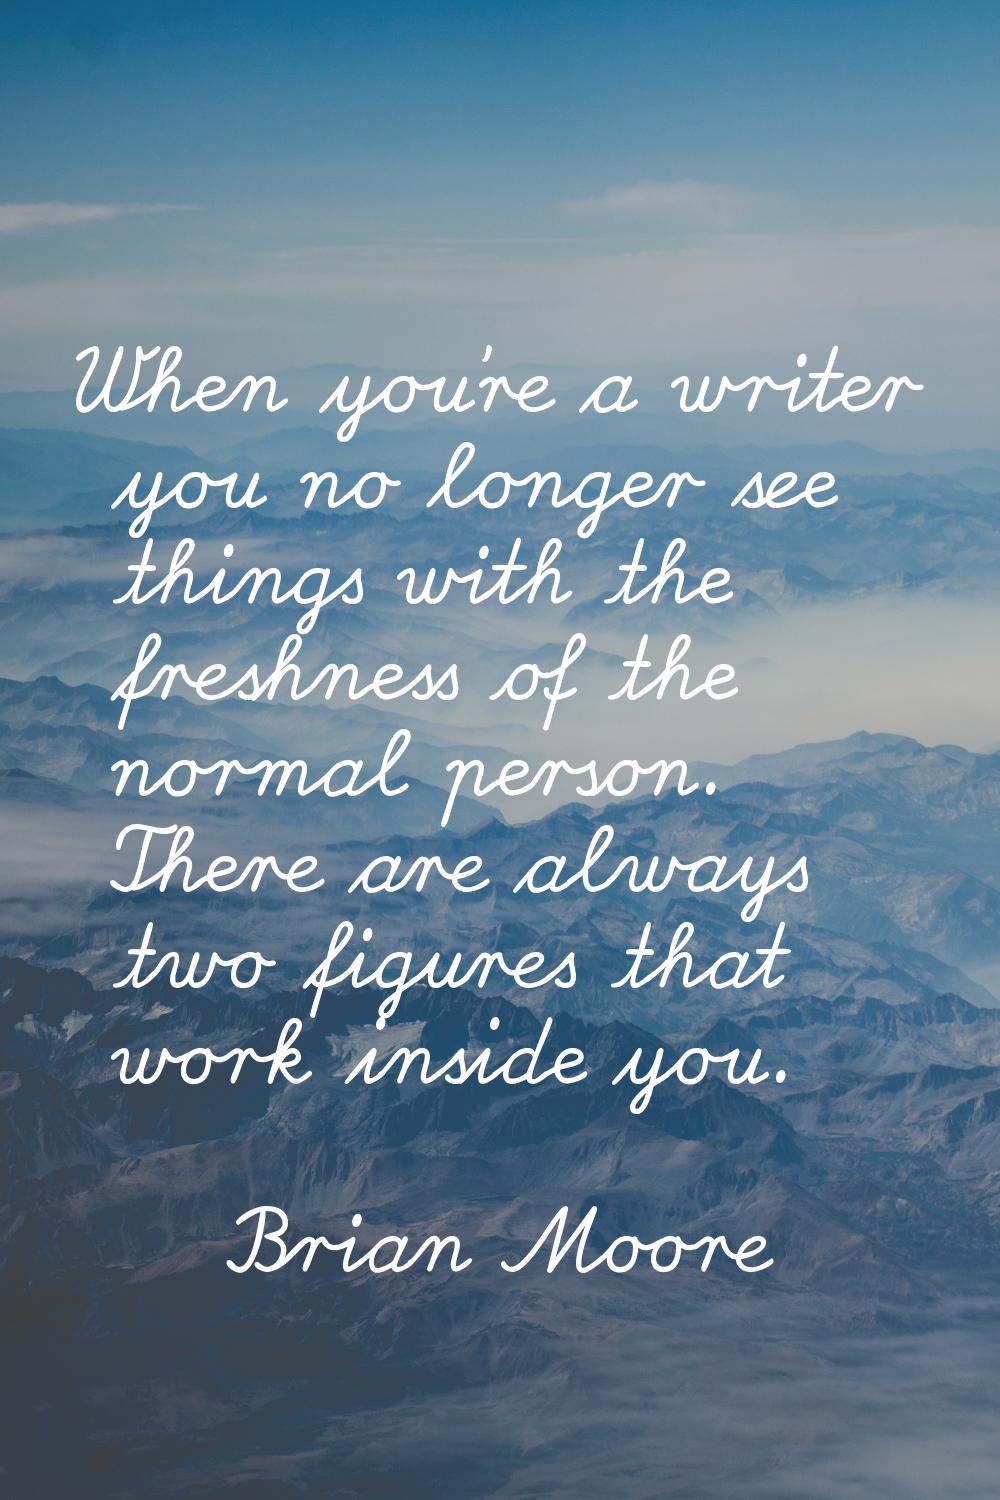 When you're a writer you no longer see things with the freshness of the normal person. There are al